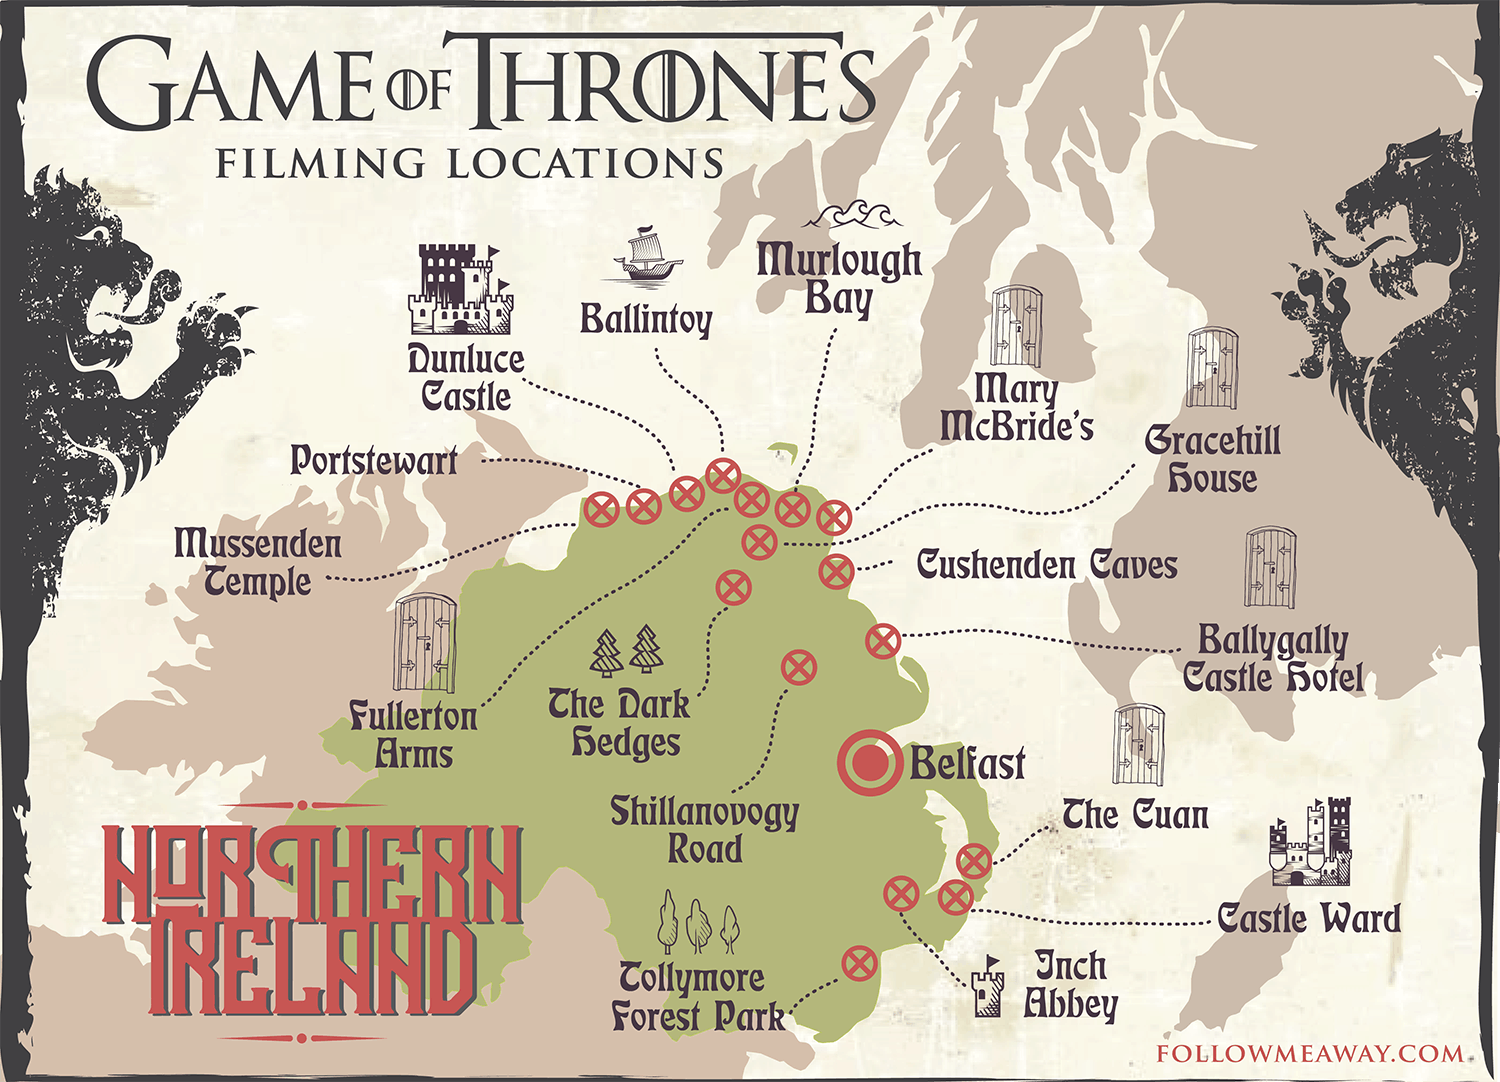 Game Of Thrones Locations Map In Ireland | Map of Game Of Thrones filming locations in Northern Ireland | Game Of Thrones filming locations map | how to plan a trip to see Game of thrones filming locations in Ireland | map of popular game of thrones filming locations in northern ireland #ireland #gameofthrones